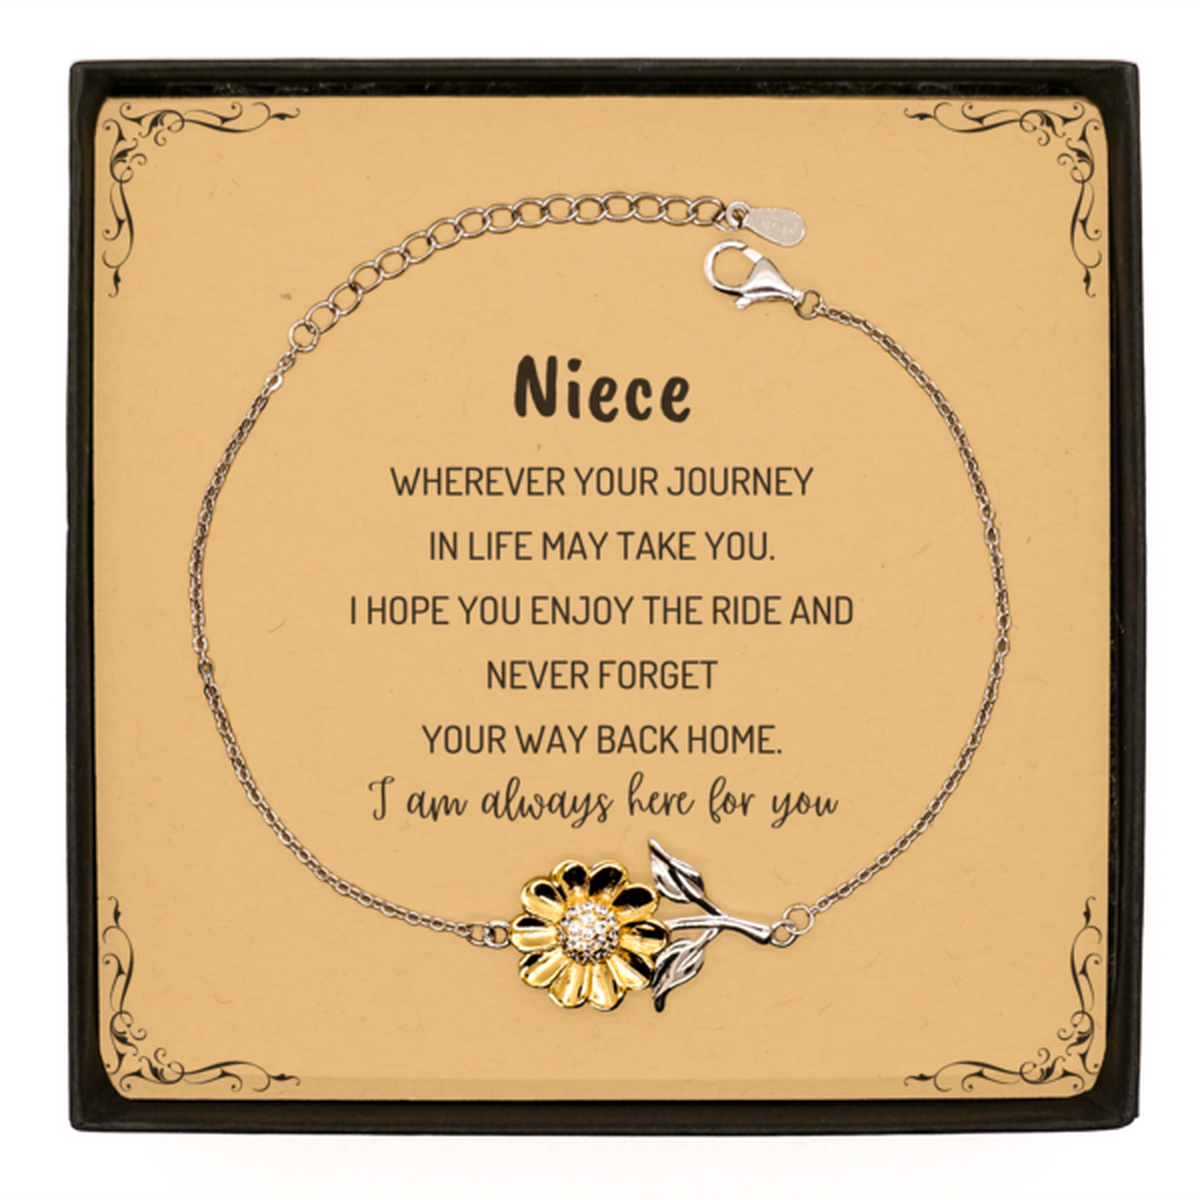 Niece wherever your journey in life may take you, I am always here for you Niece Sunflower Bracelet, Awesome Christmas Gifts For Niece Message Card, Niece Birthday Gifts for Men Women Family Loved One